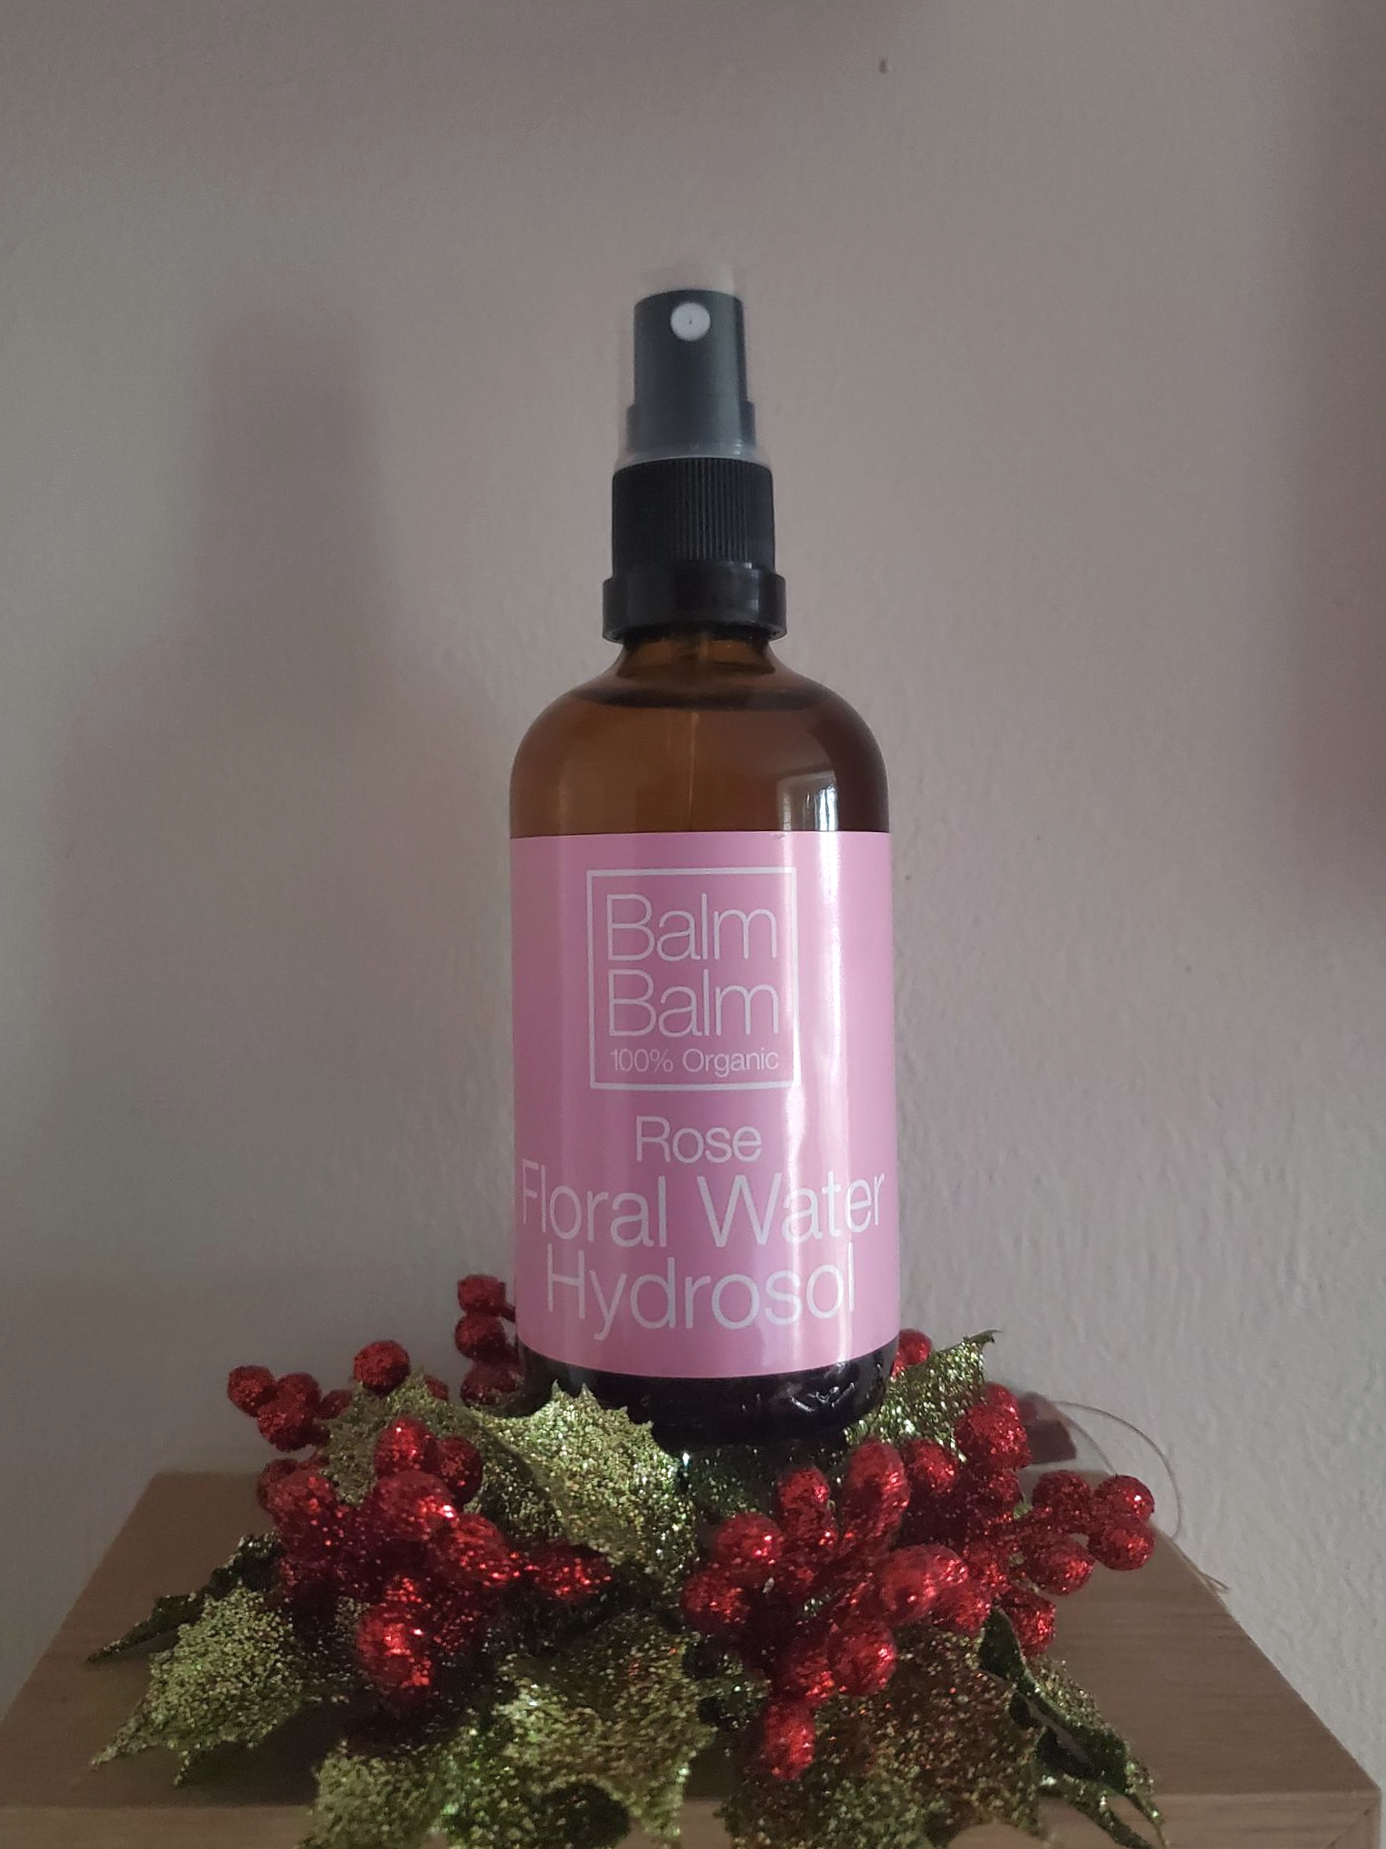 Balm Balm Rose Floral Water Hydrosol on top of festive decoration